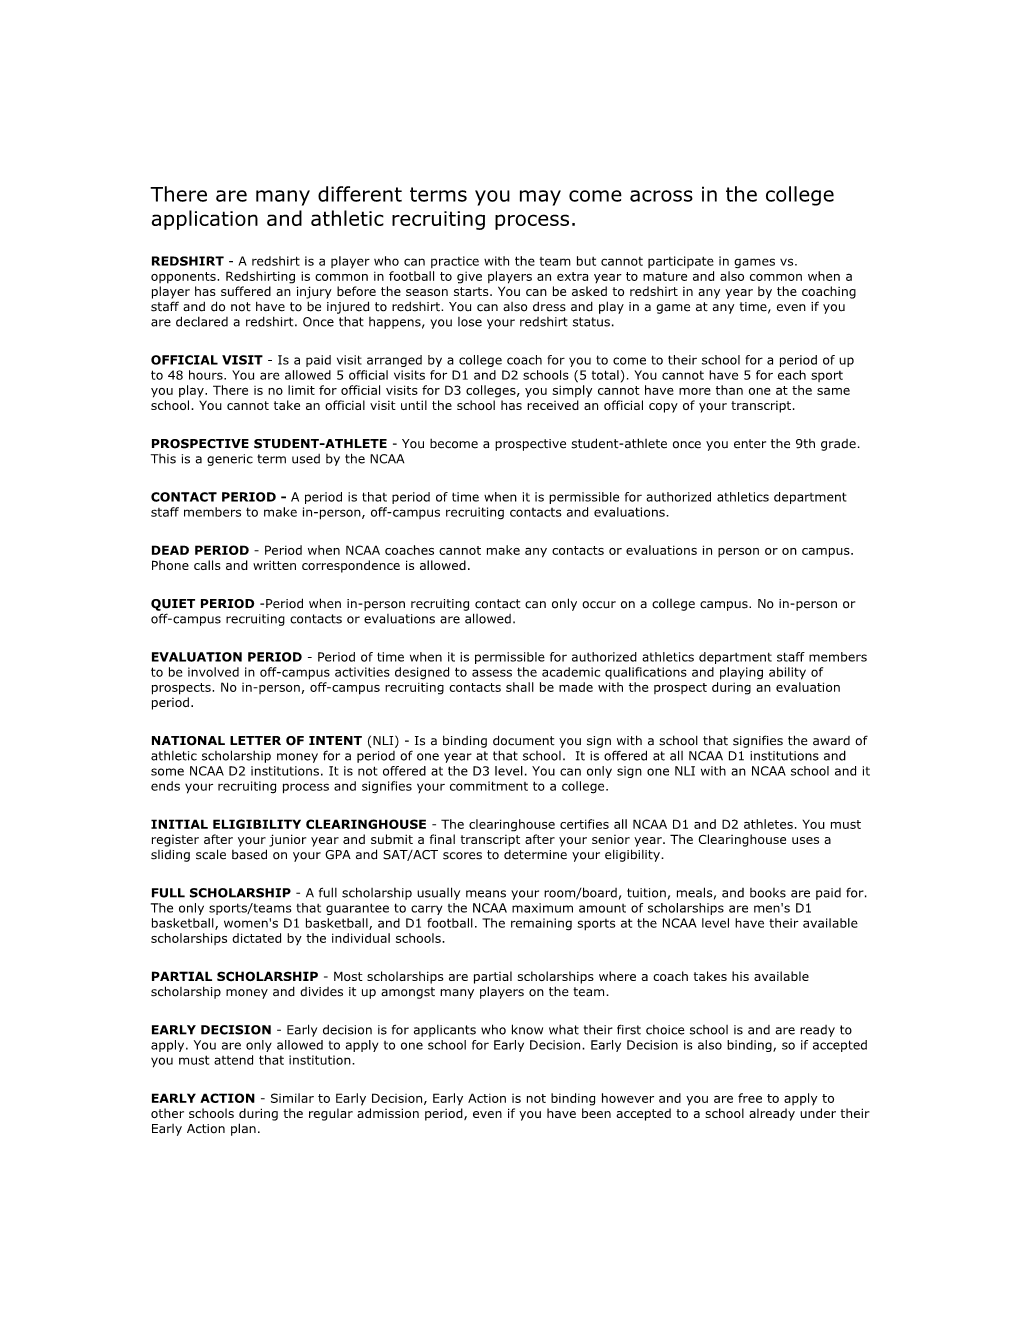 There Are Many Different Terms You May Come Across in the College Application and Athletic